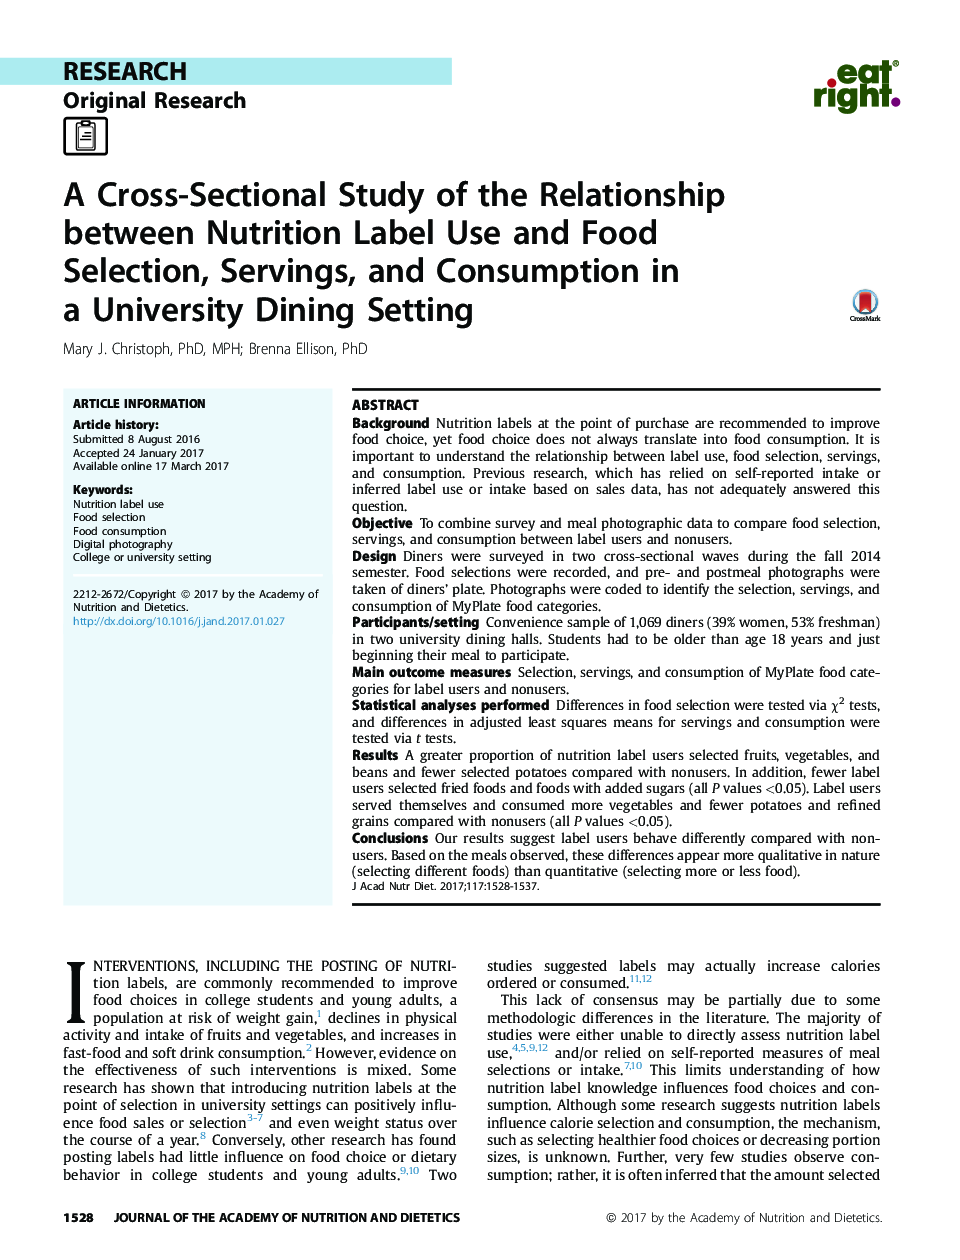 A Cross-Sectional Study of the Relationship between Nutrition Label Use and Food Selection, Servings, and Consumption in aÂ University Dining Setting